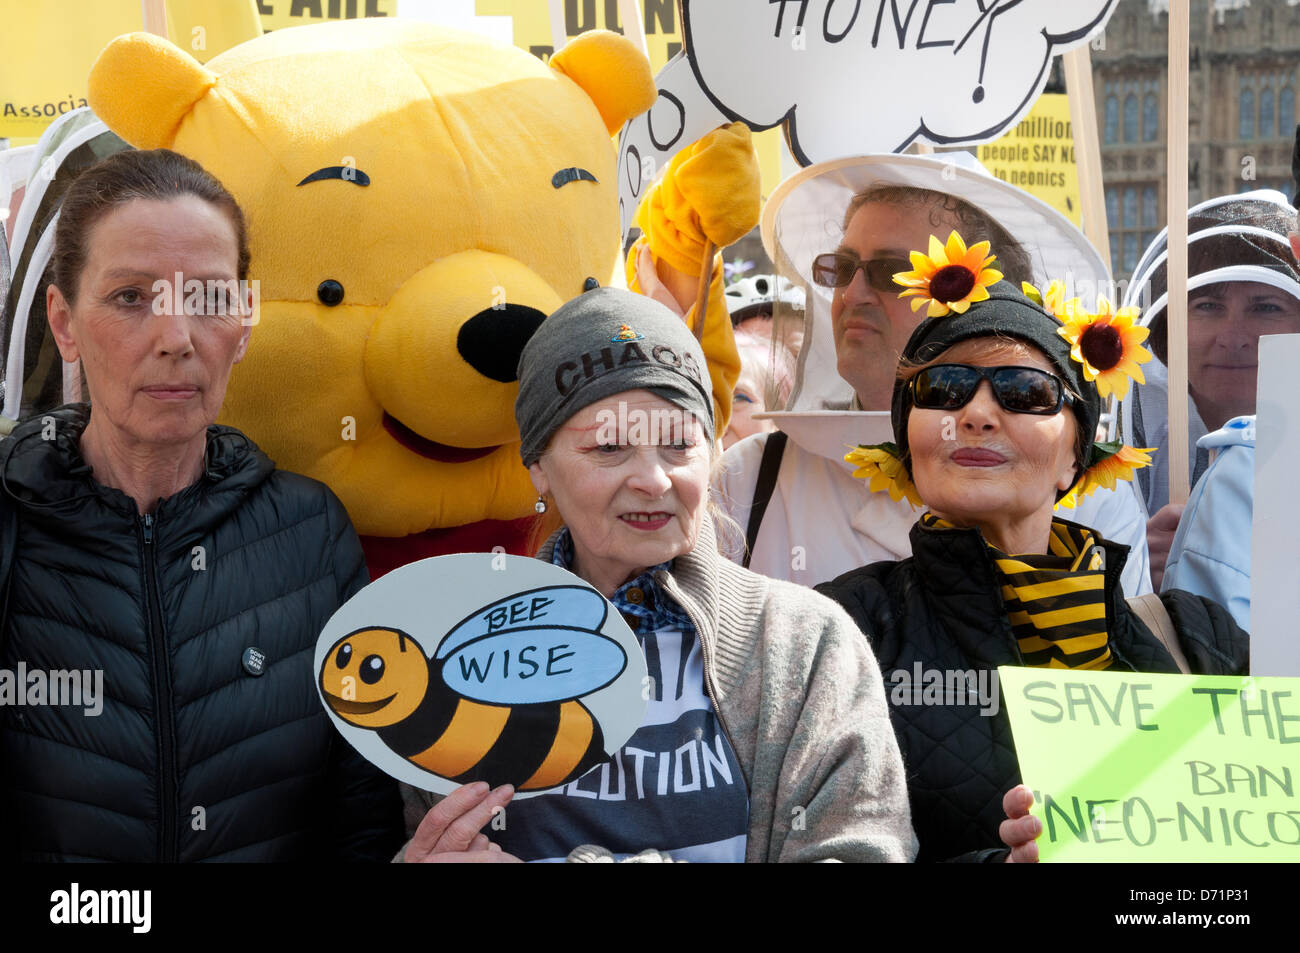 London, UK. 26th April 2013.  Designers Katherine Hamnett CBE (left) and Dame Vivienne Westwood, (centre) join beekeepers and fancy dressed supporters take to Parliament Square to call for a European ban on neonicotinoid pesticides. Organisers hope to persuade Rt Hon Owen Paterson MP, Secretary of State for Environment and Rural Affairs, to support a EU vote banning the bee harming neonicotinoid pesticides on Monday 29th April. Stock Photo